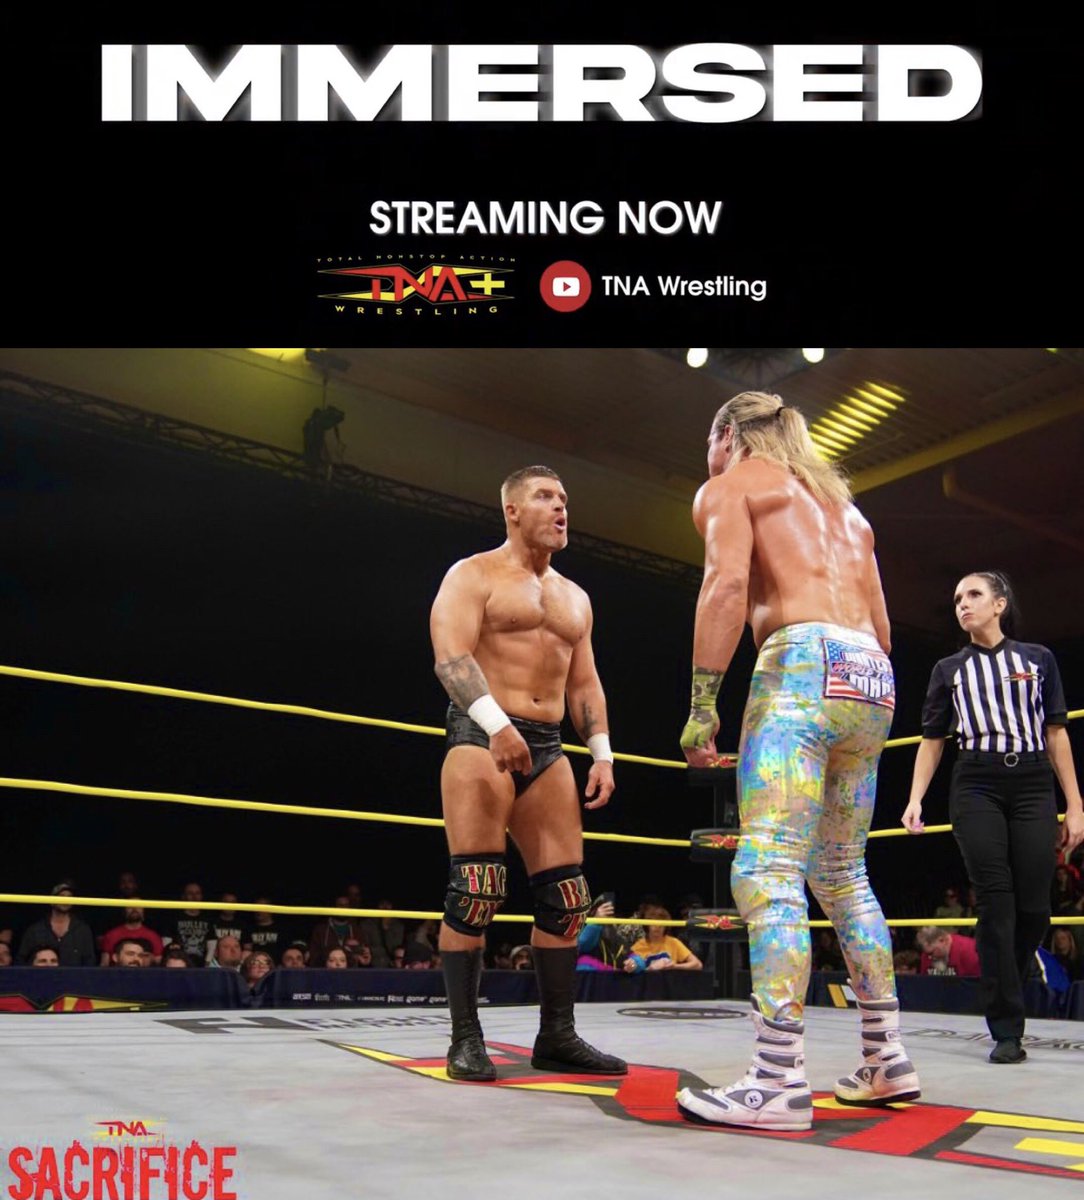 ICYMI: IMMERSED: behind the scenes diving deep into the @SteveMaclin vs. @NicTNemeth match at #Sacrifice AVAILABLE NOW : TNA Plus or YouTube WATCH: youtu.be/M9CBvjvG7v8 #tna #tnawrestling #tnaimpact @JorgeBarbosa5 #rebellion